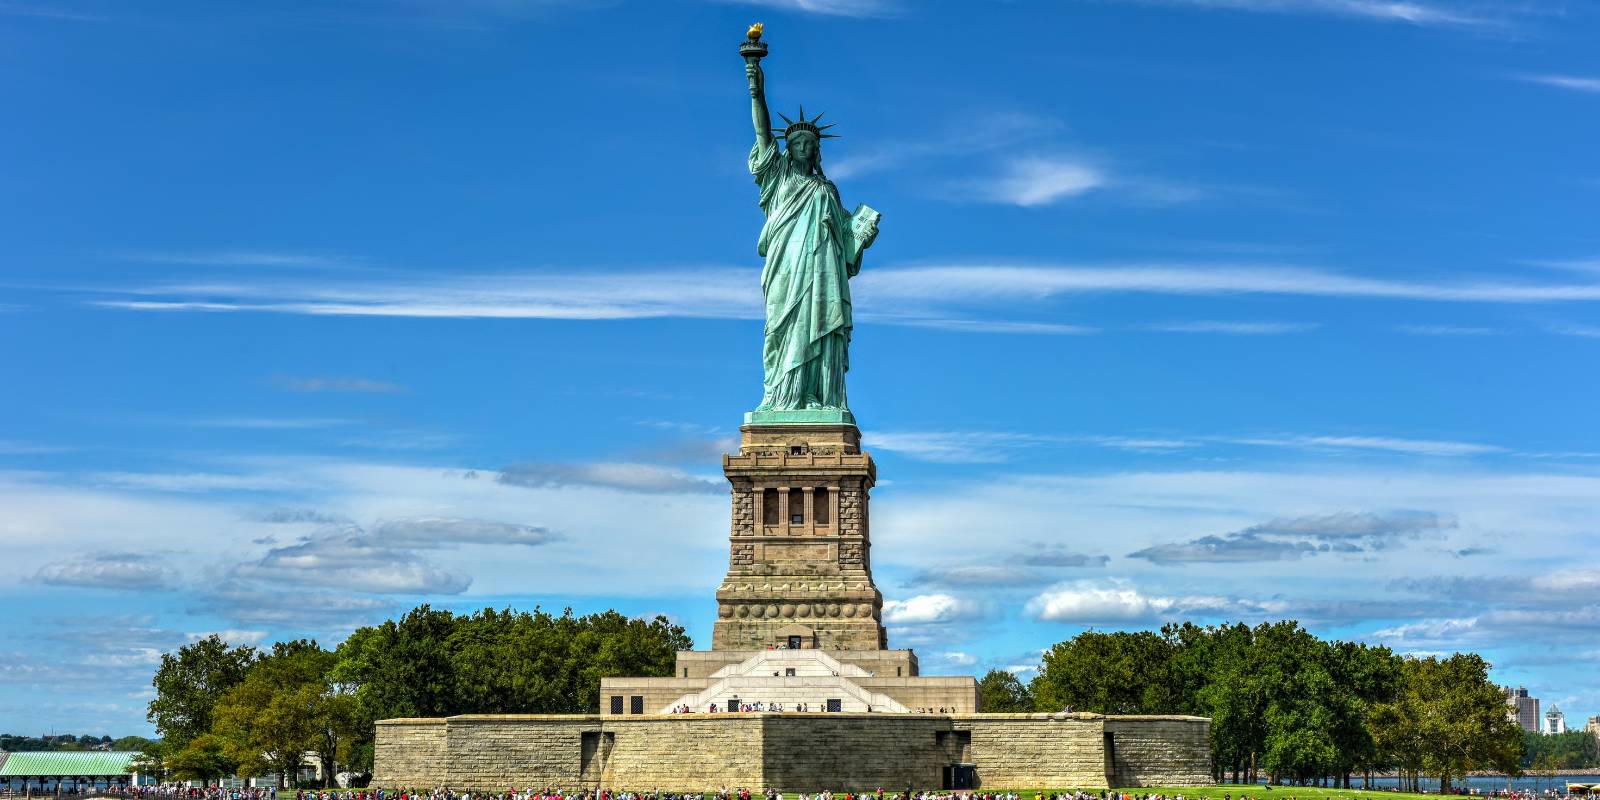 October 28th: Lady Liberty Unveiled As A French Gift